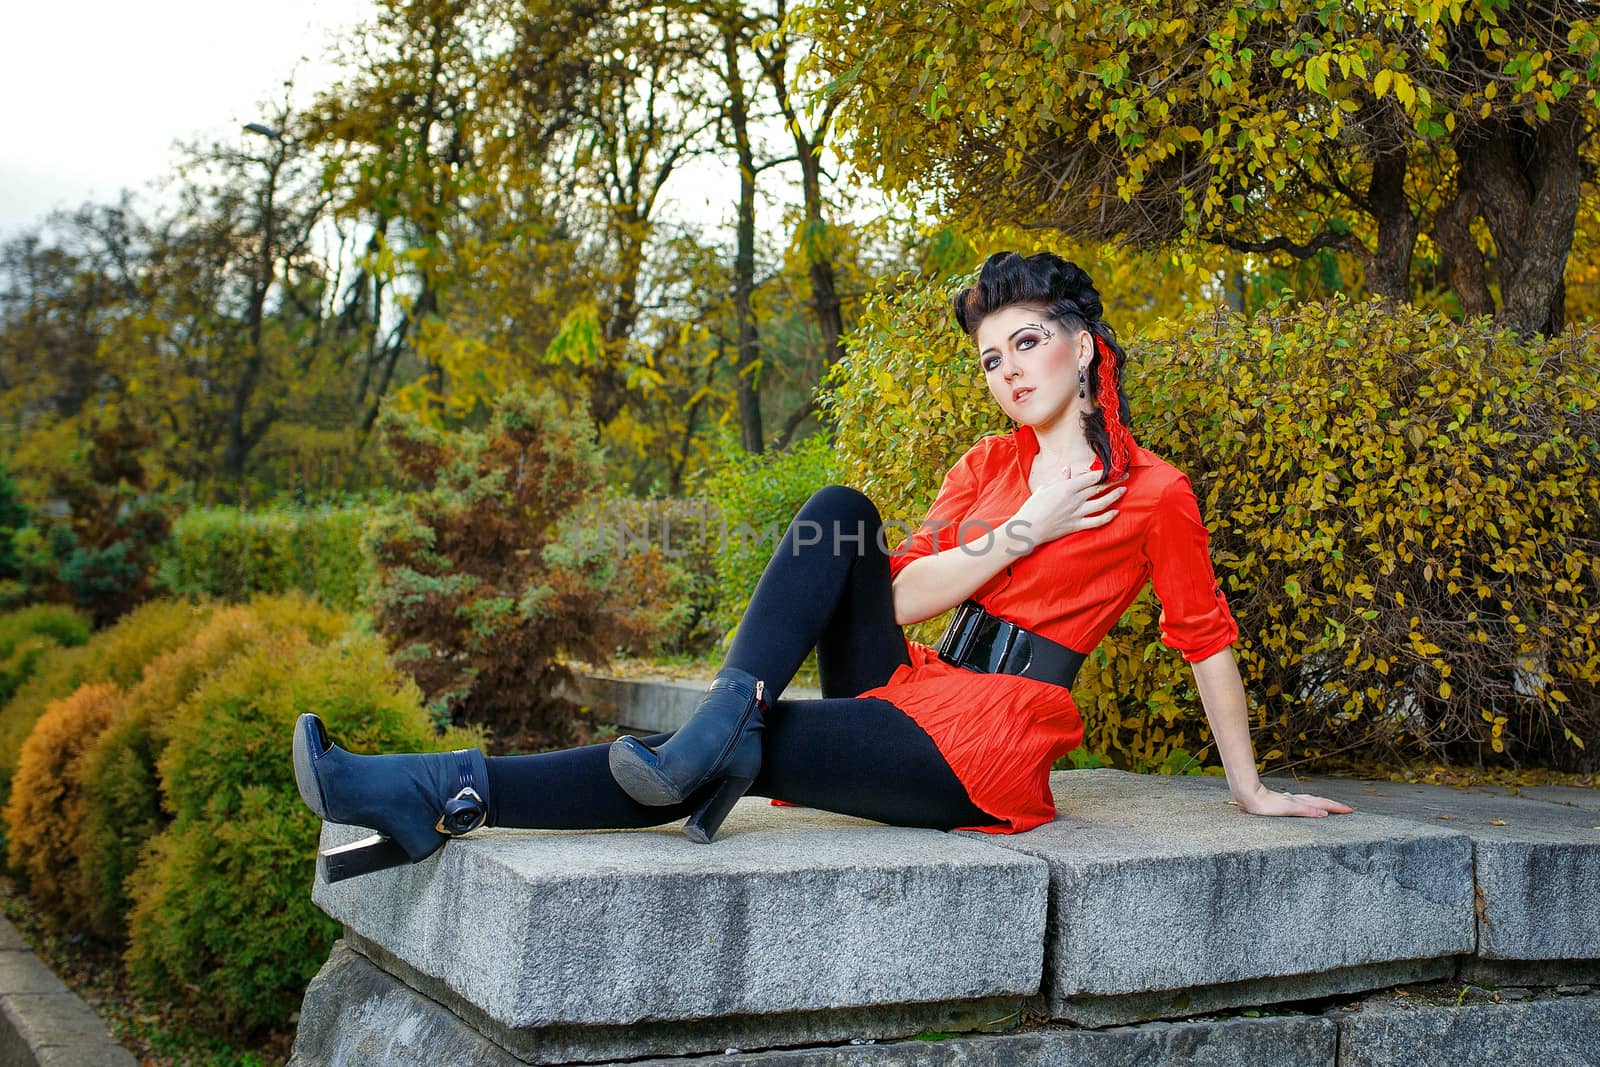 Attractive young girl in a red shirt walks in the city park